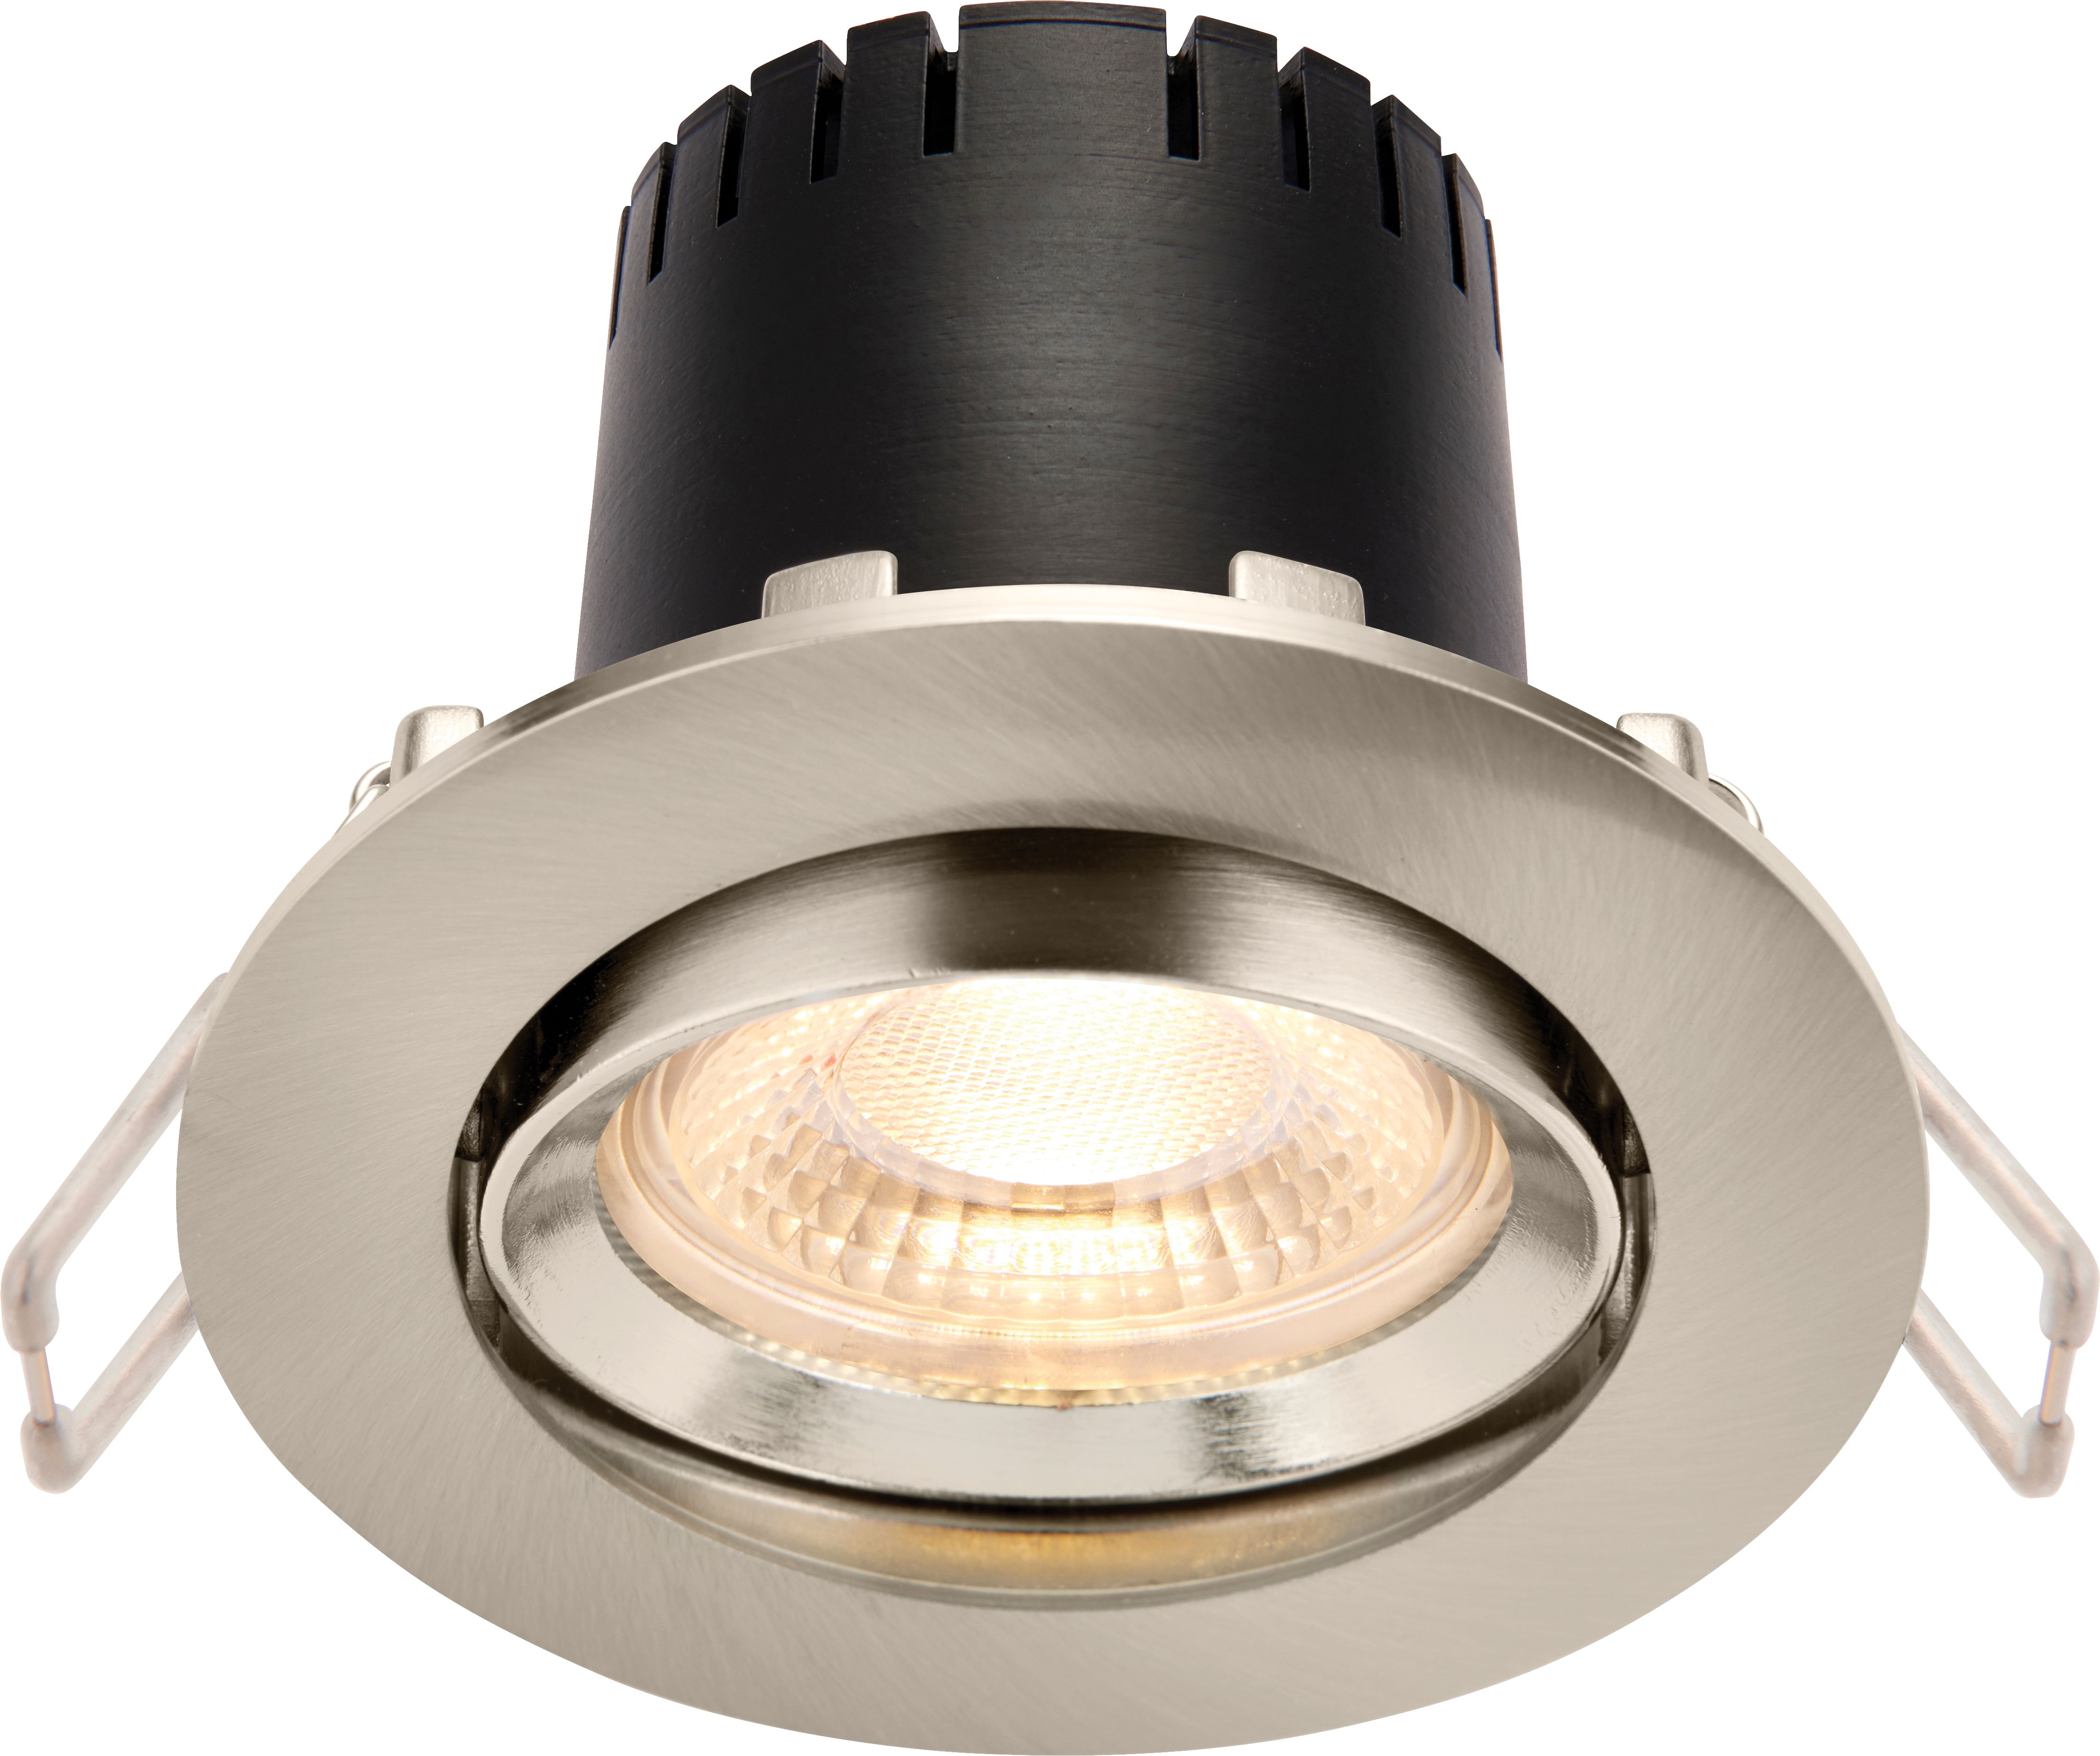 Saxby Integrated LED Adjustable Warm White Dimmable Downlight 5.5W - Brushed Nickel